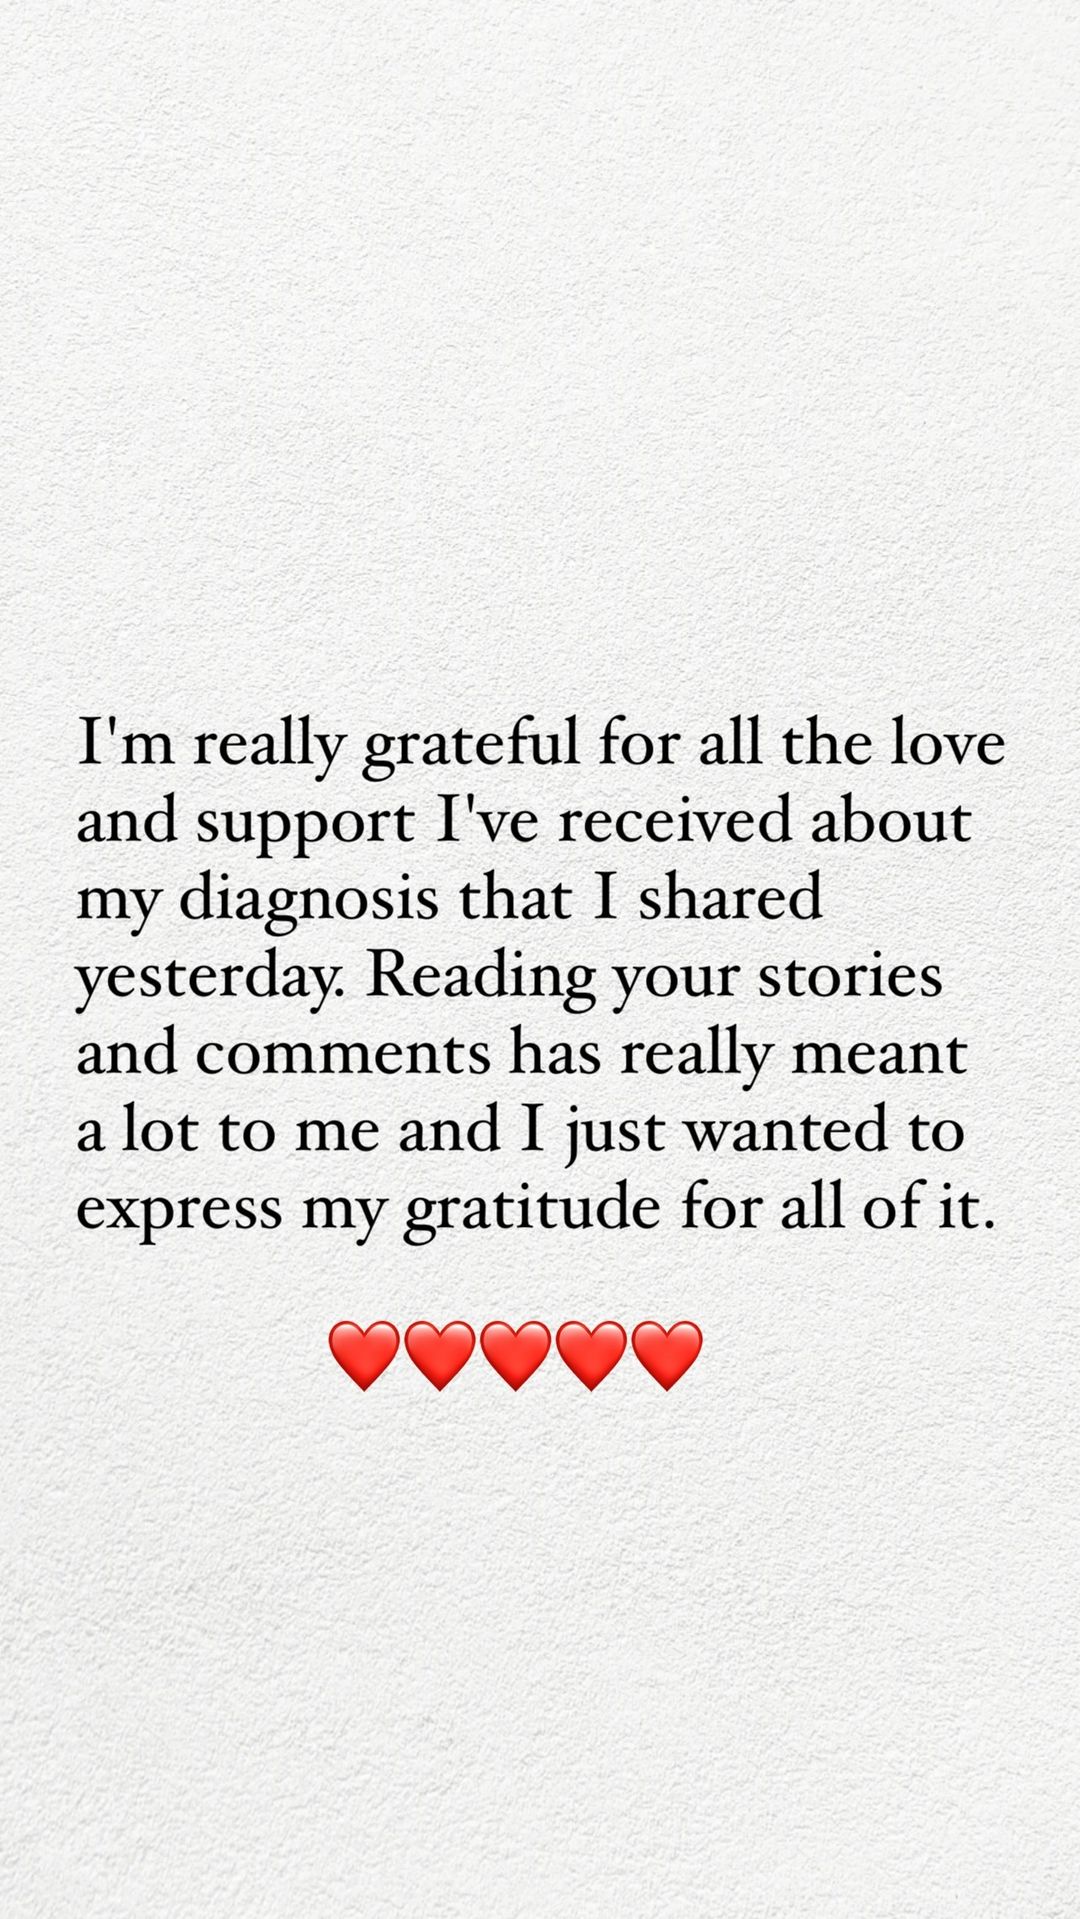 The actress shared a post on her Instagram Stories to show gratitude for her followers sharing their own stories